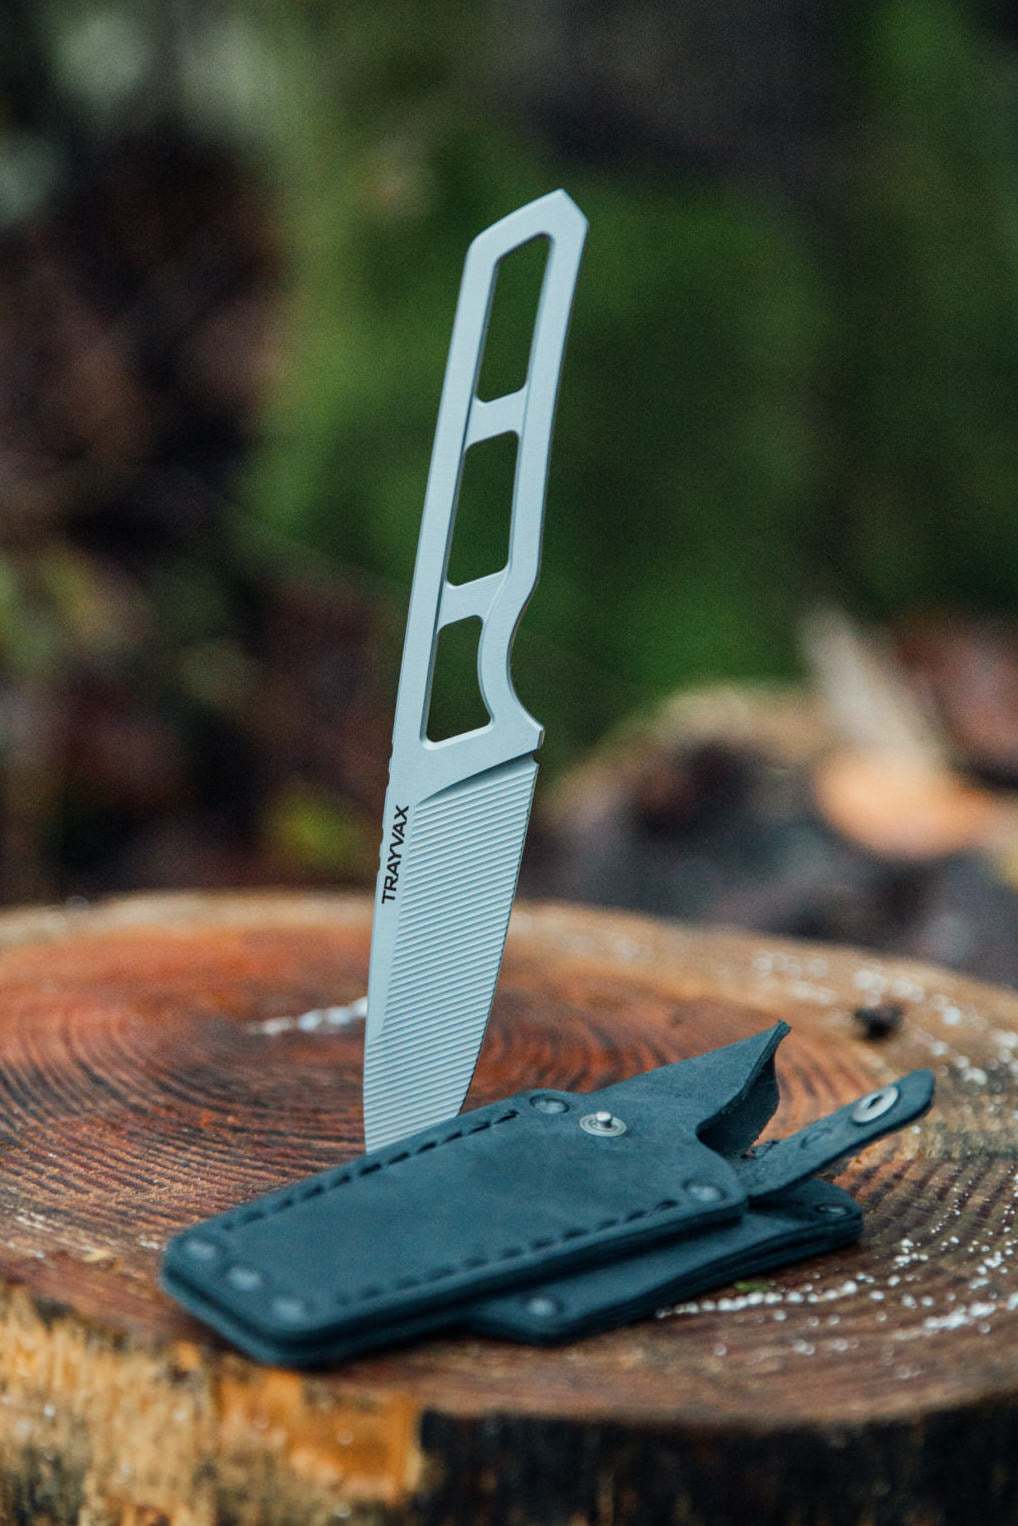 Why You Should Get a Trek Knife for your Next Adventure